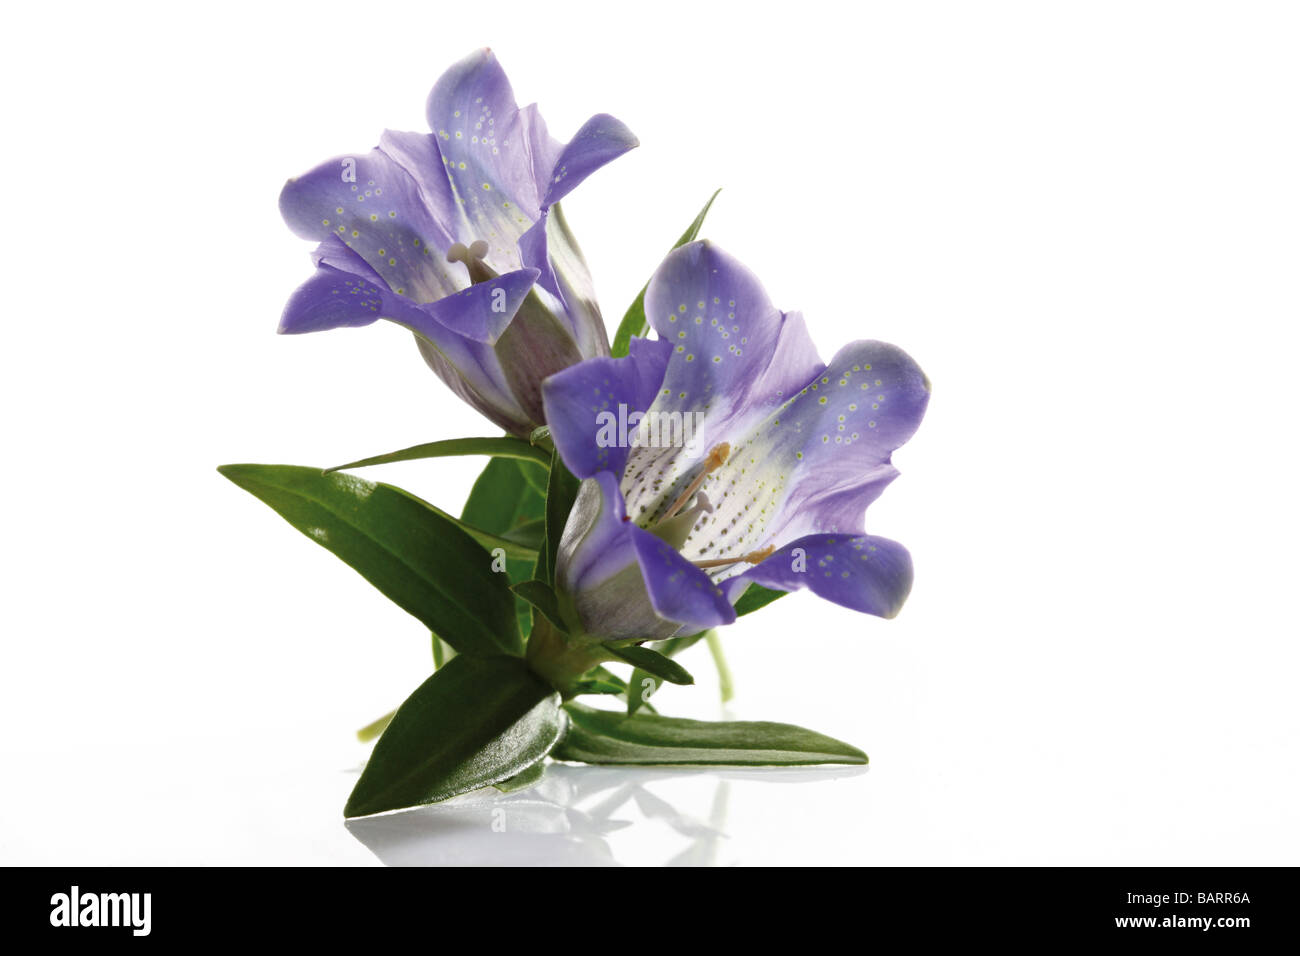 Blue gentian flowers (Gentiana) close-up Stock Photo